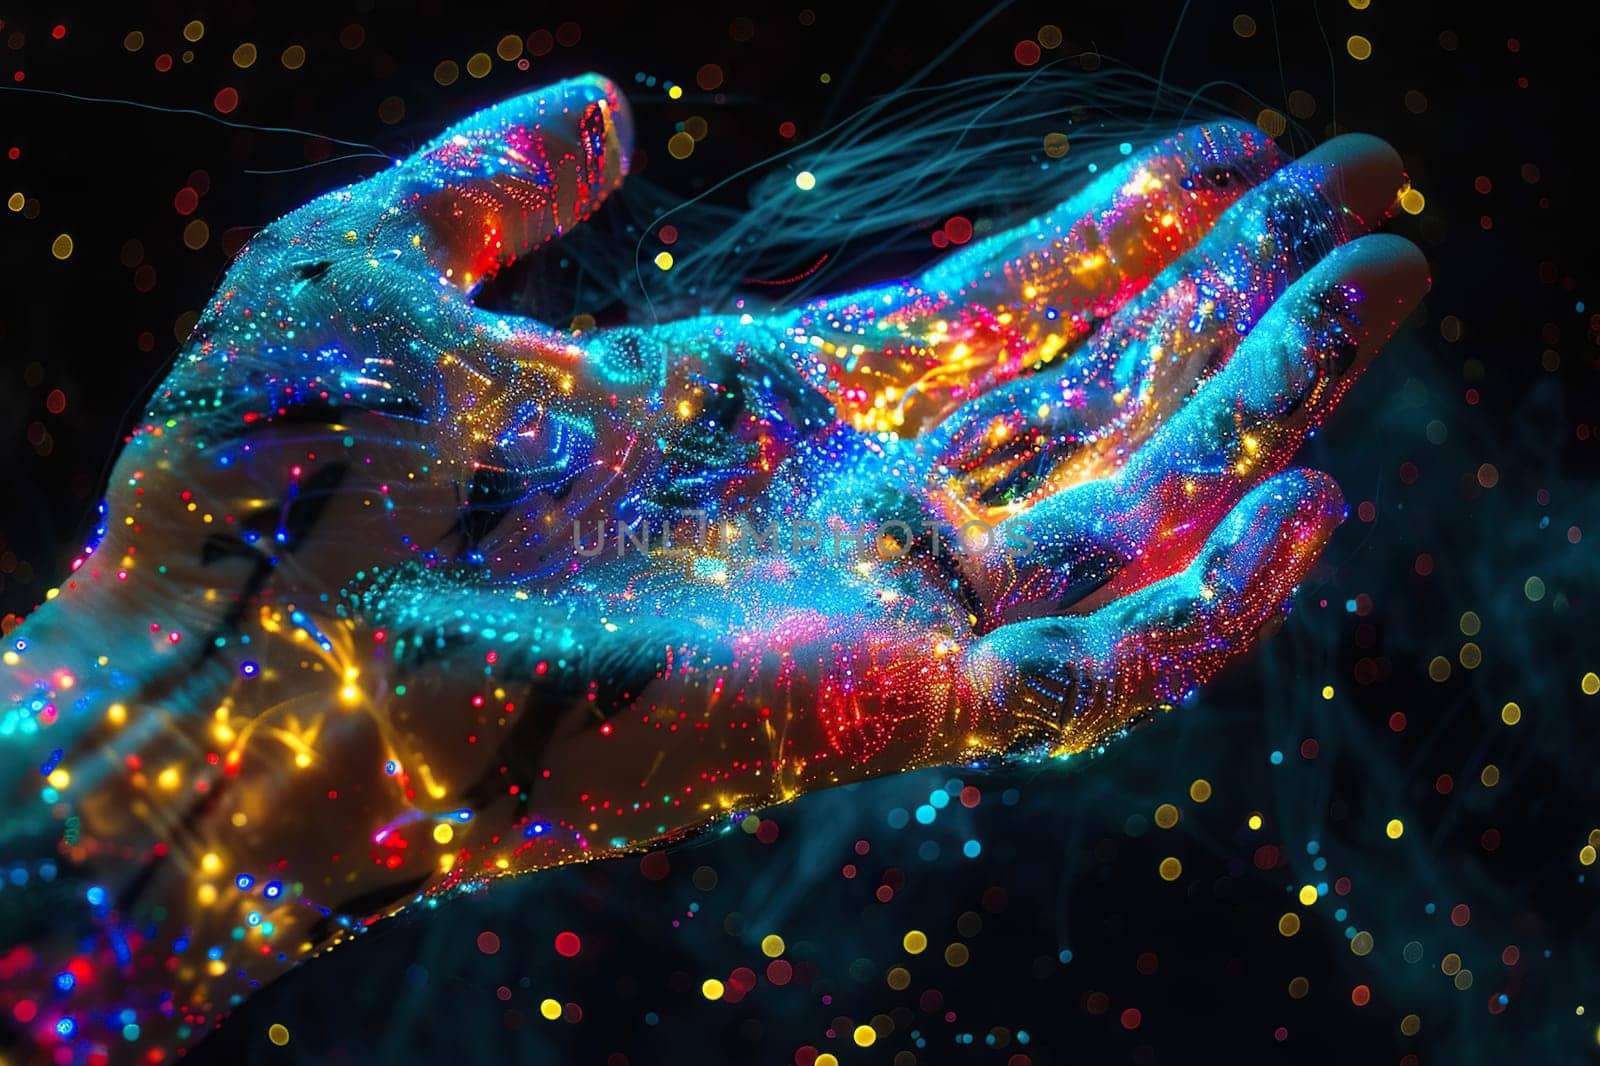 Abstract hand giving. Image of a human hand in a luminous stream.